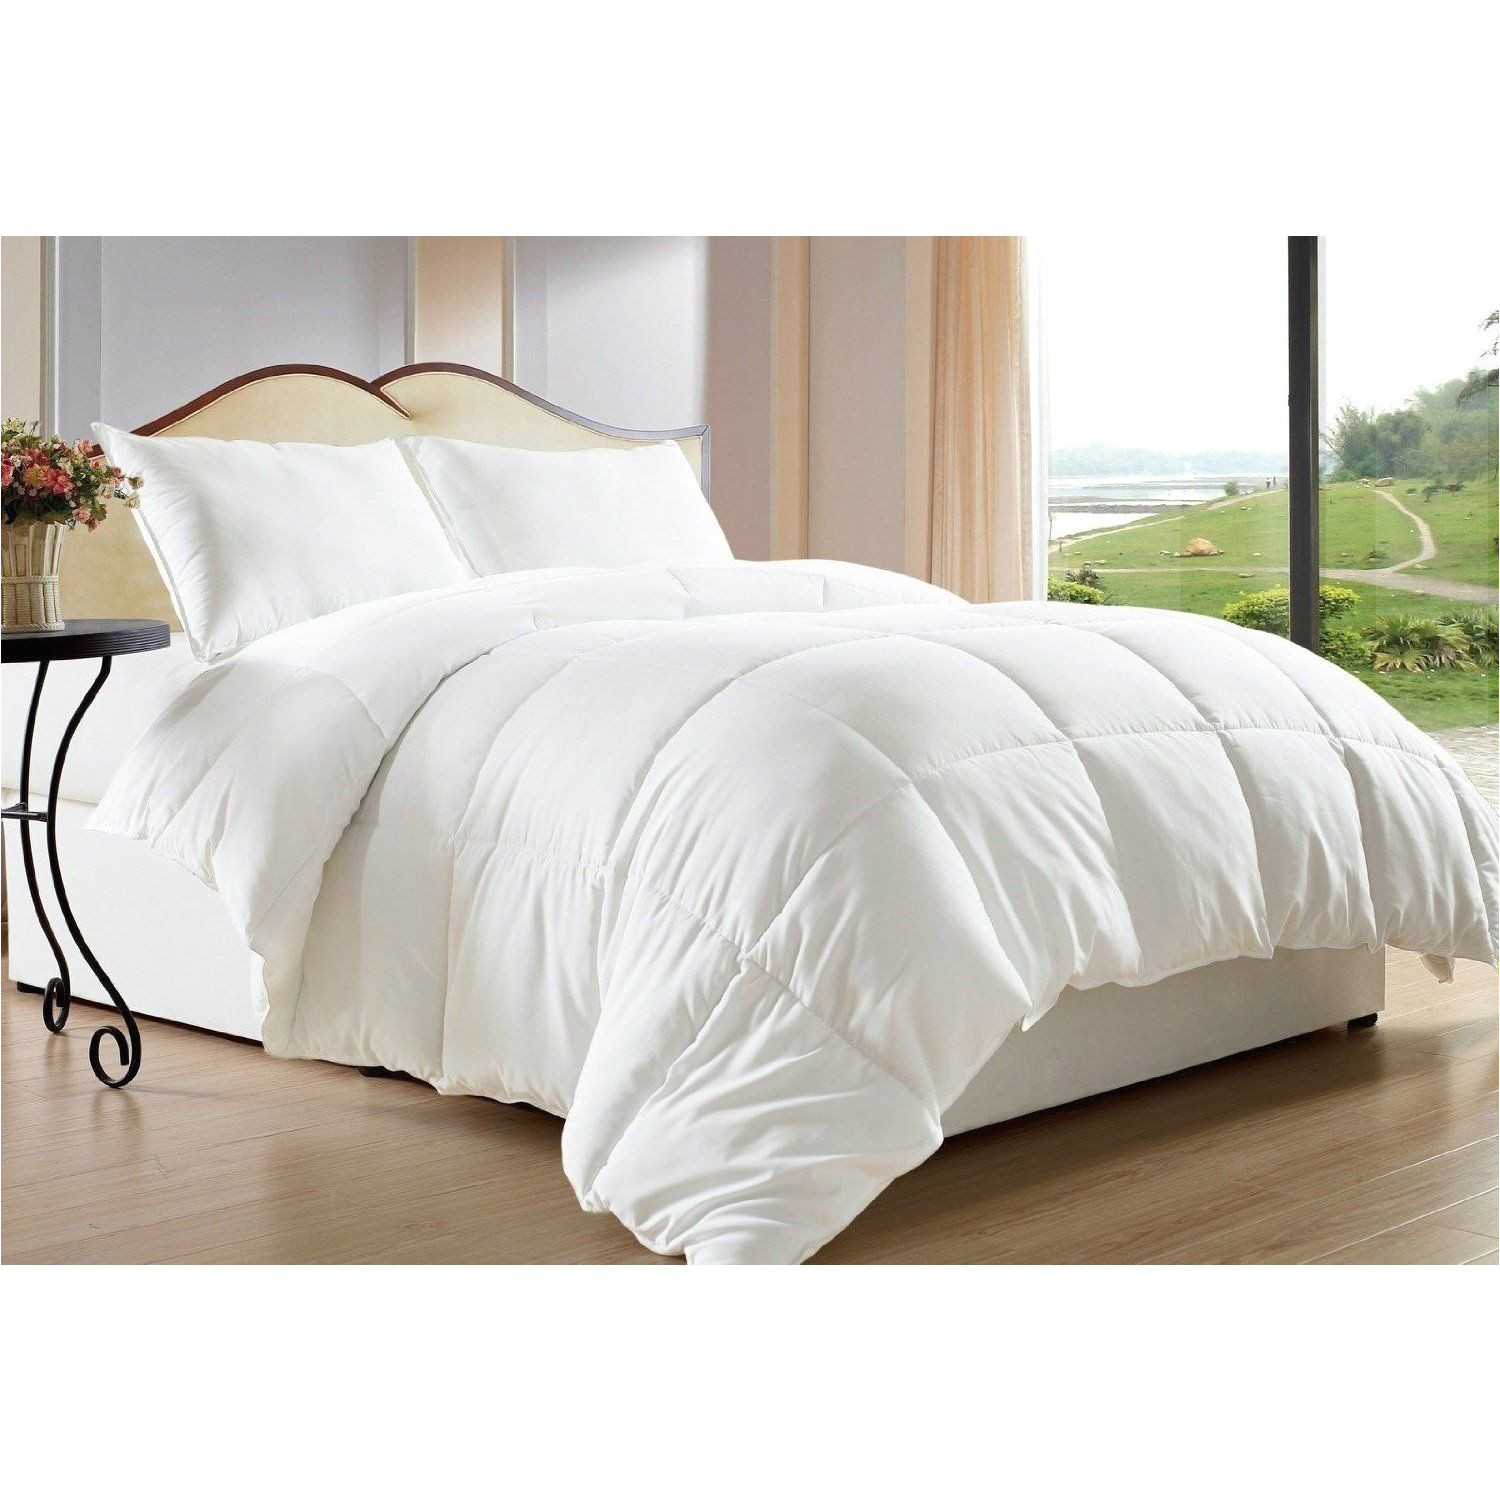 Whats the Difference Between Down and Down Alternative Comforters Hypoallergenic Down Alternative Comforters Provide the Warmth and